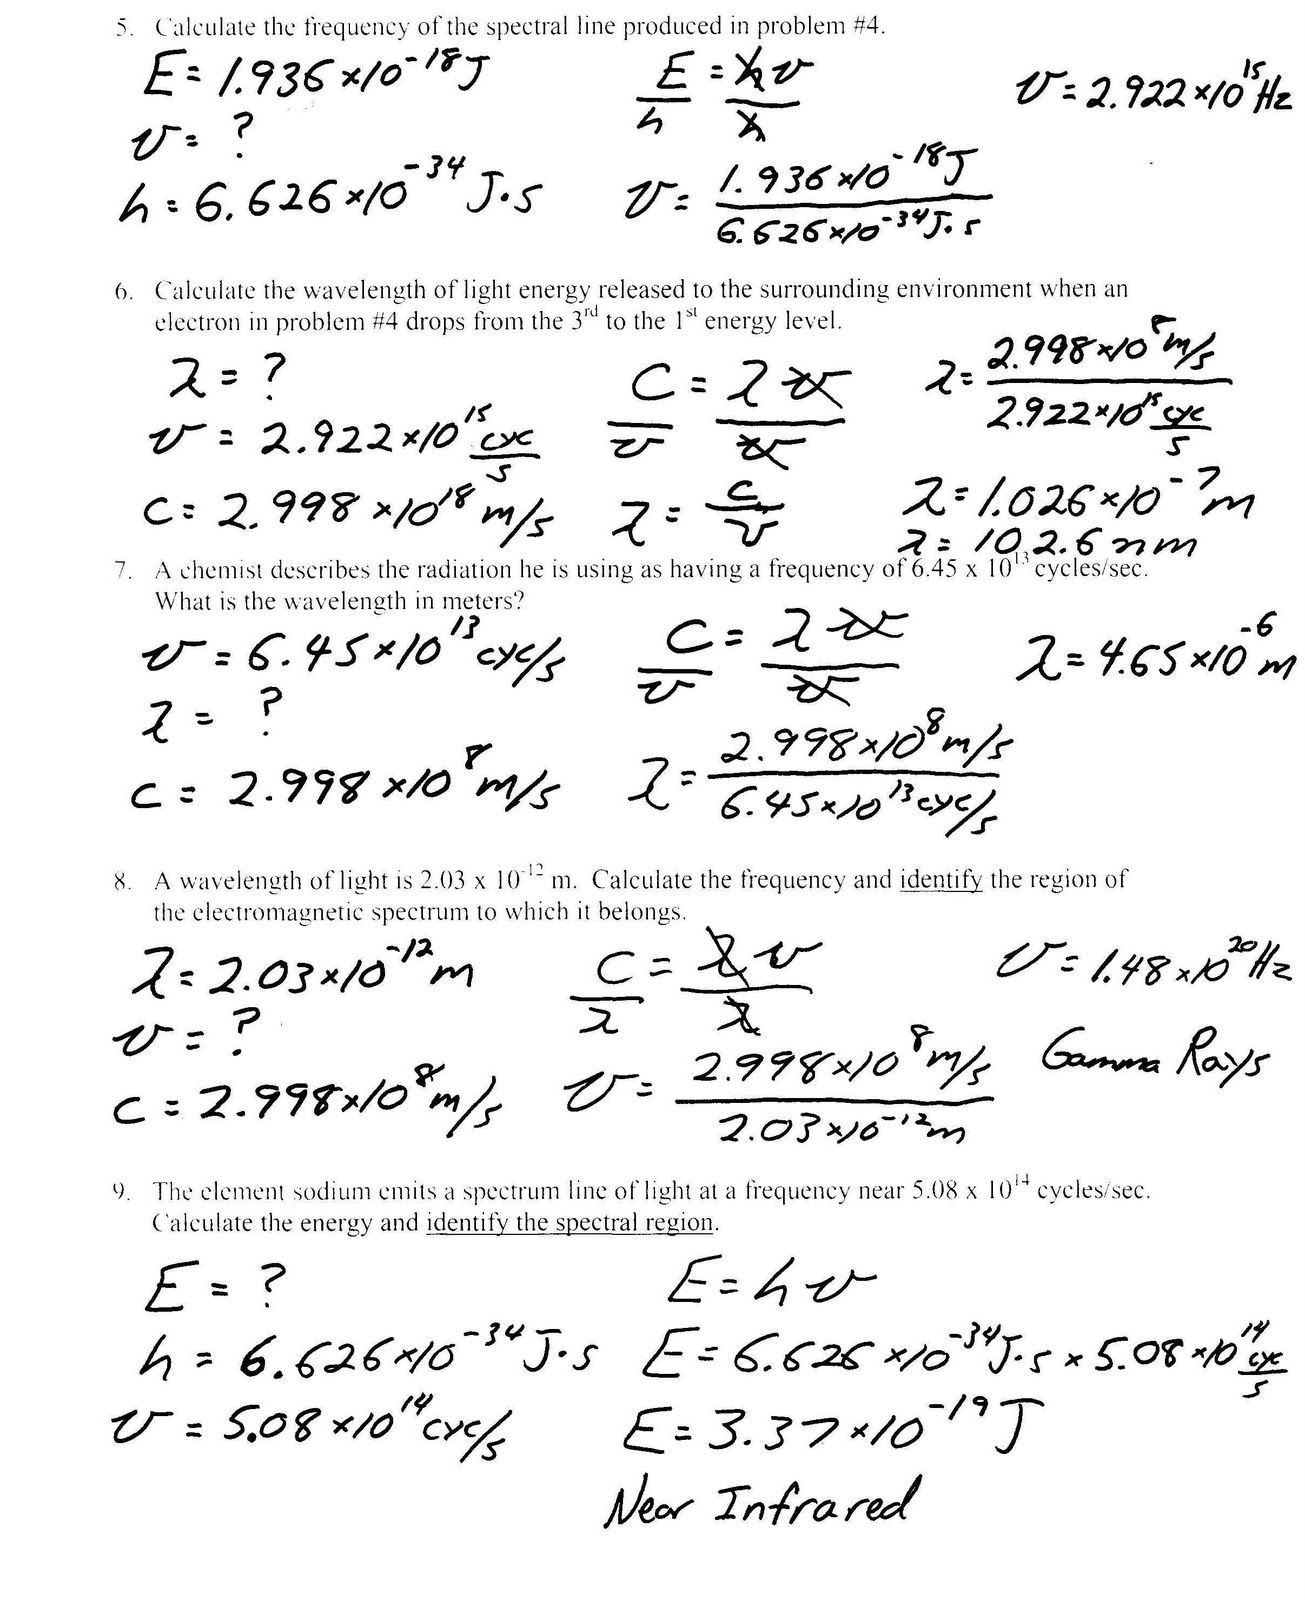 Conduction Convection Radiation Worksheet